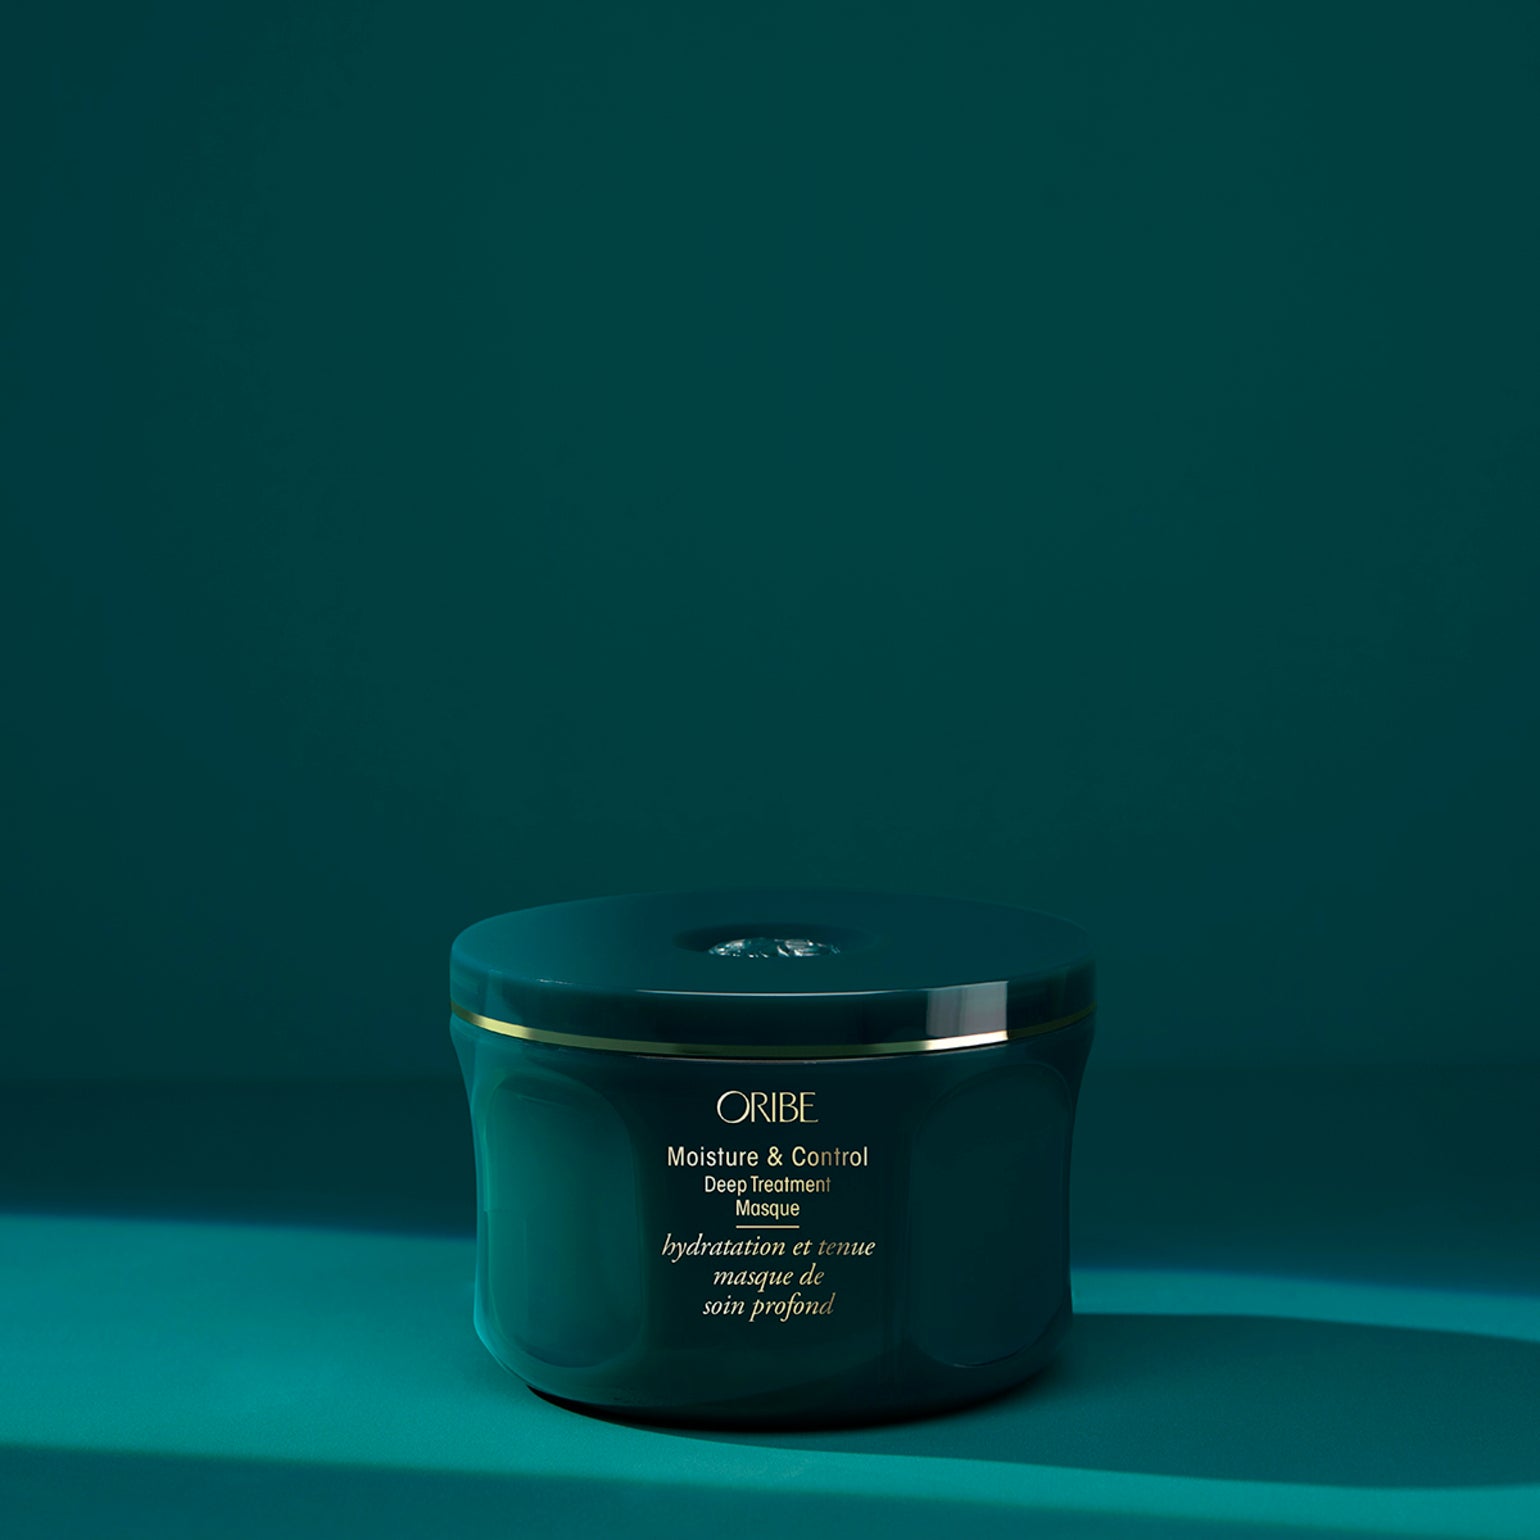 Oribe Deep Treatment Masque for Moisture and Control